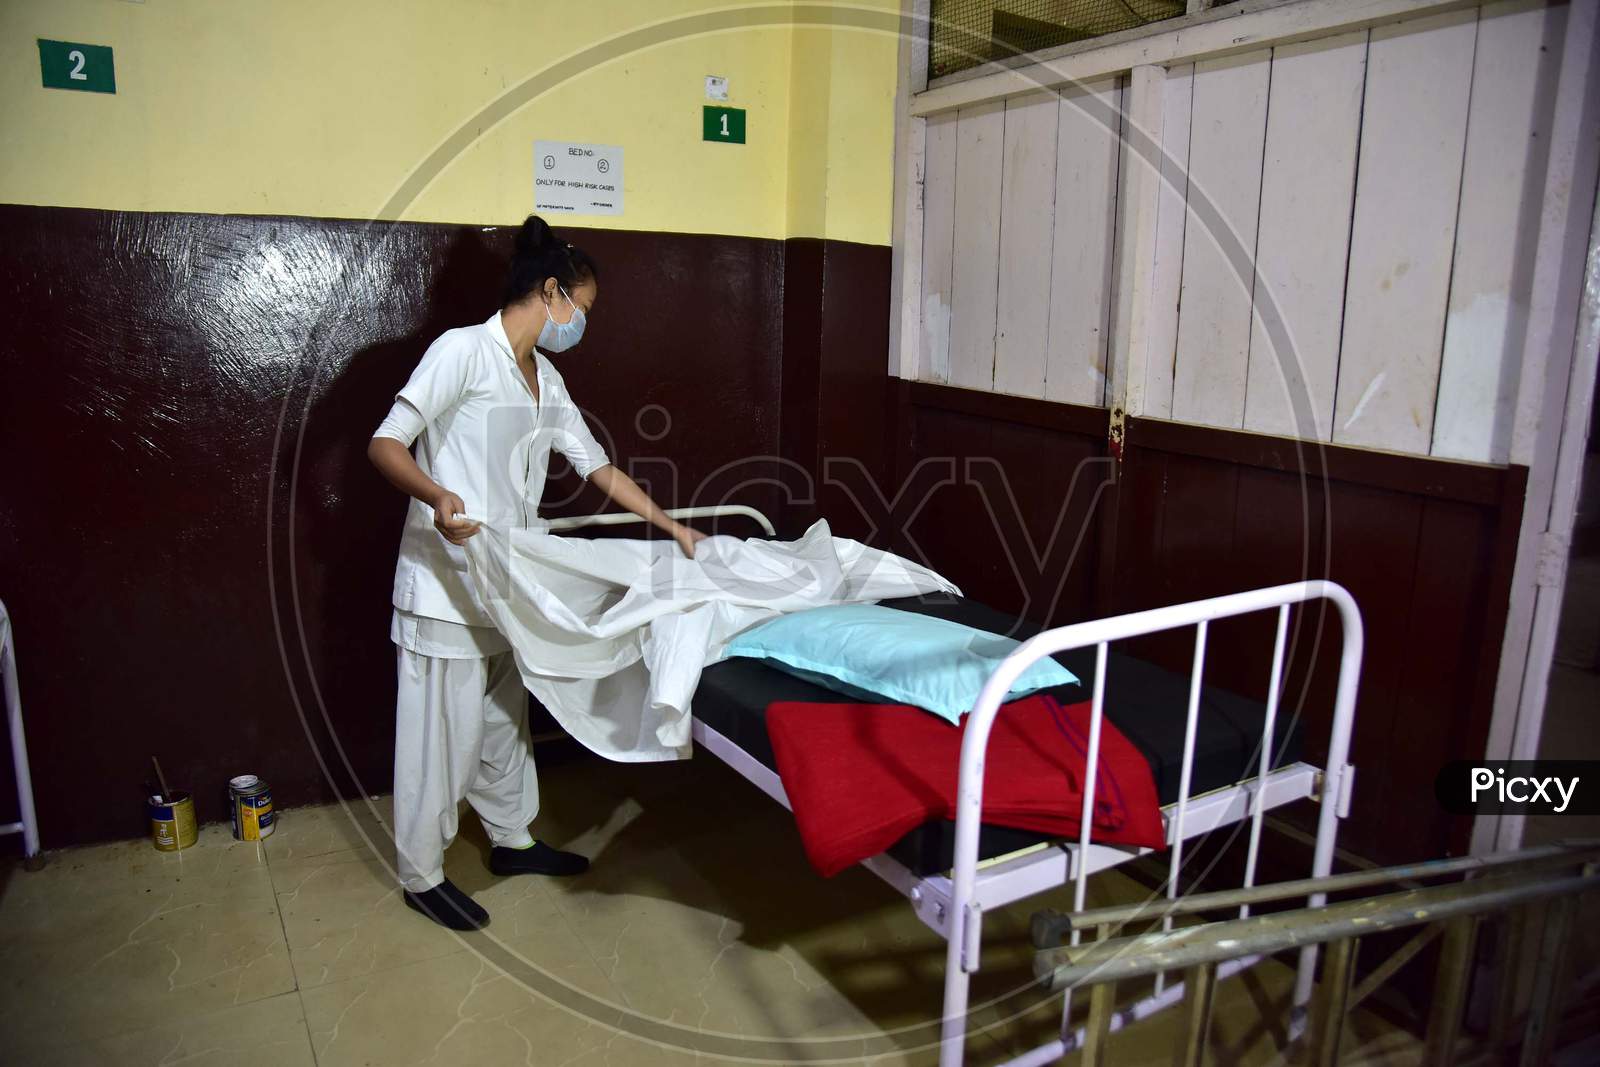 A Nurse  Arranges Beds  Of A Isolation Ward  At Civil Hospital  During A Government-Imposed Nationwide Lockdown As A Preventive Measure Against The Covid-19 Coronavirus In Nagaon District Of Assam On March 30,2020